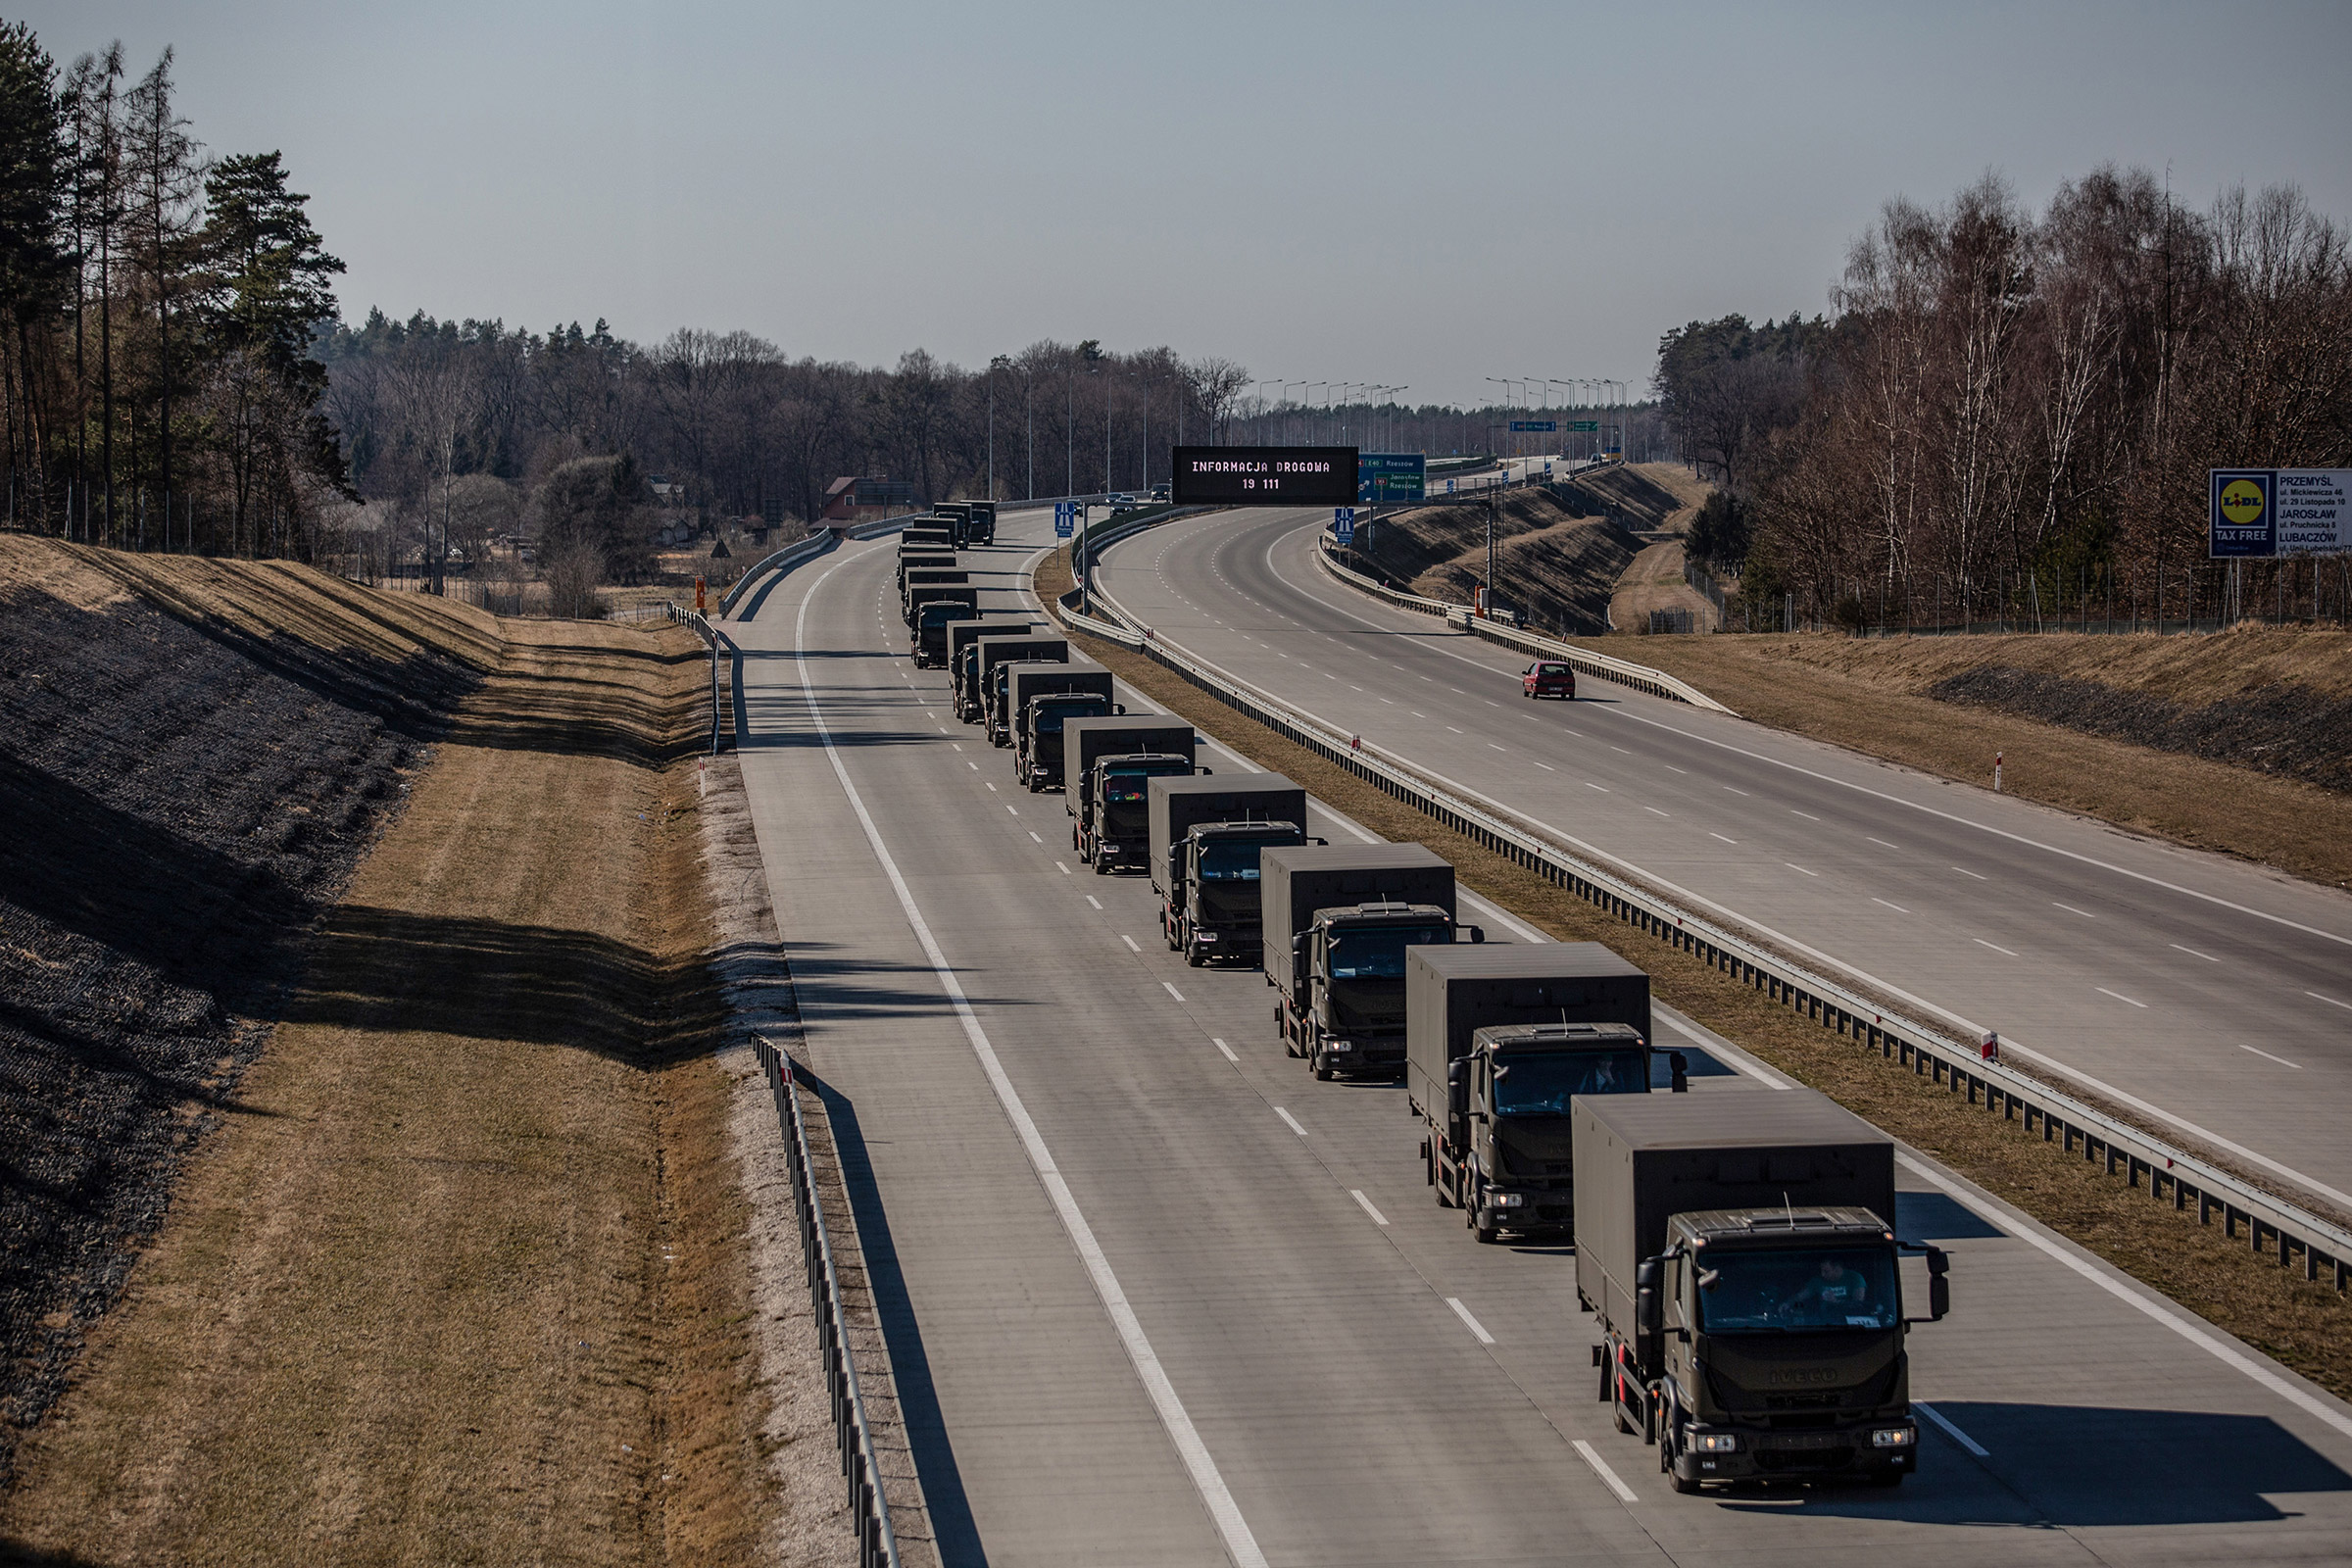 A convoy of unmarked trucks carrying supplies for Ukraine passes through Korczowa, Poland, on March 17 (Angel Garcia—Bloomberg/Getty Images)